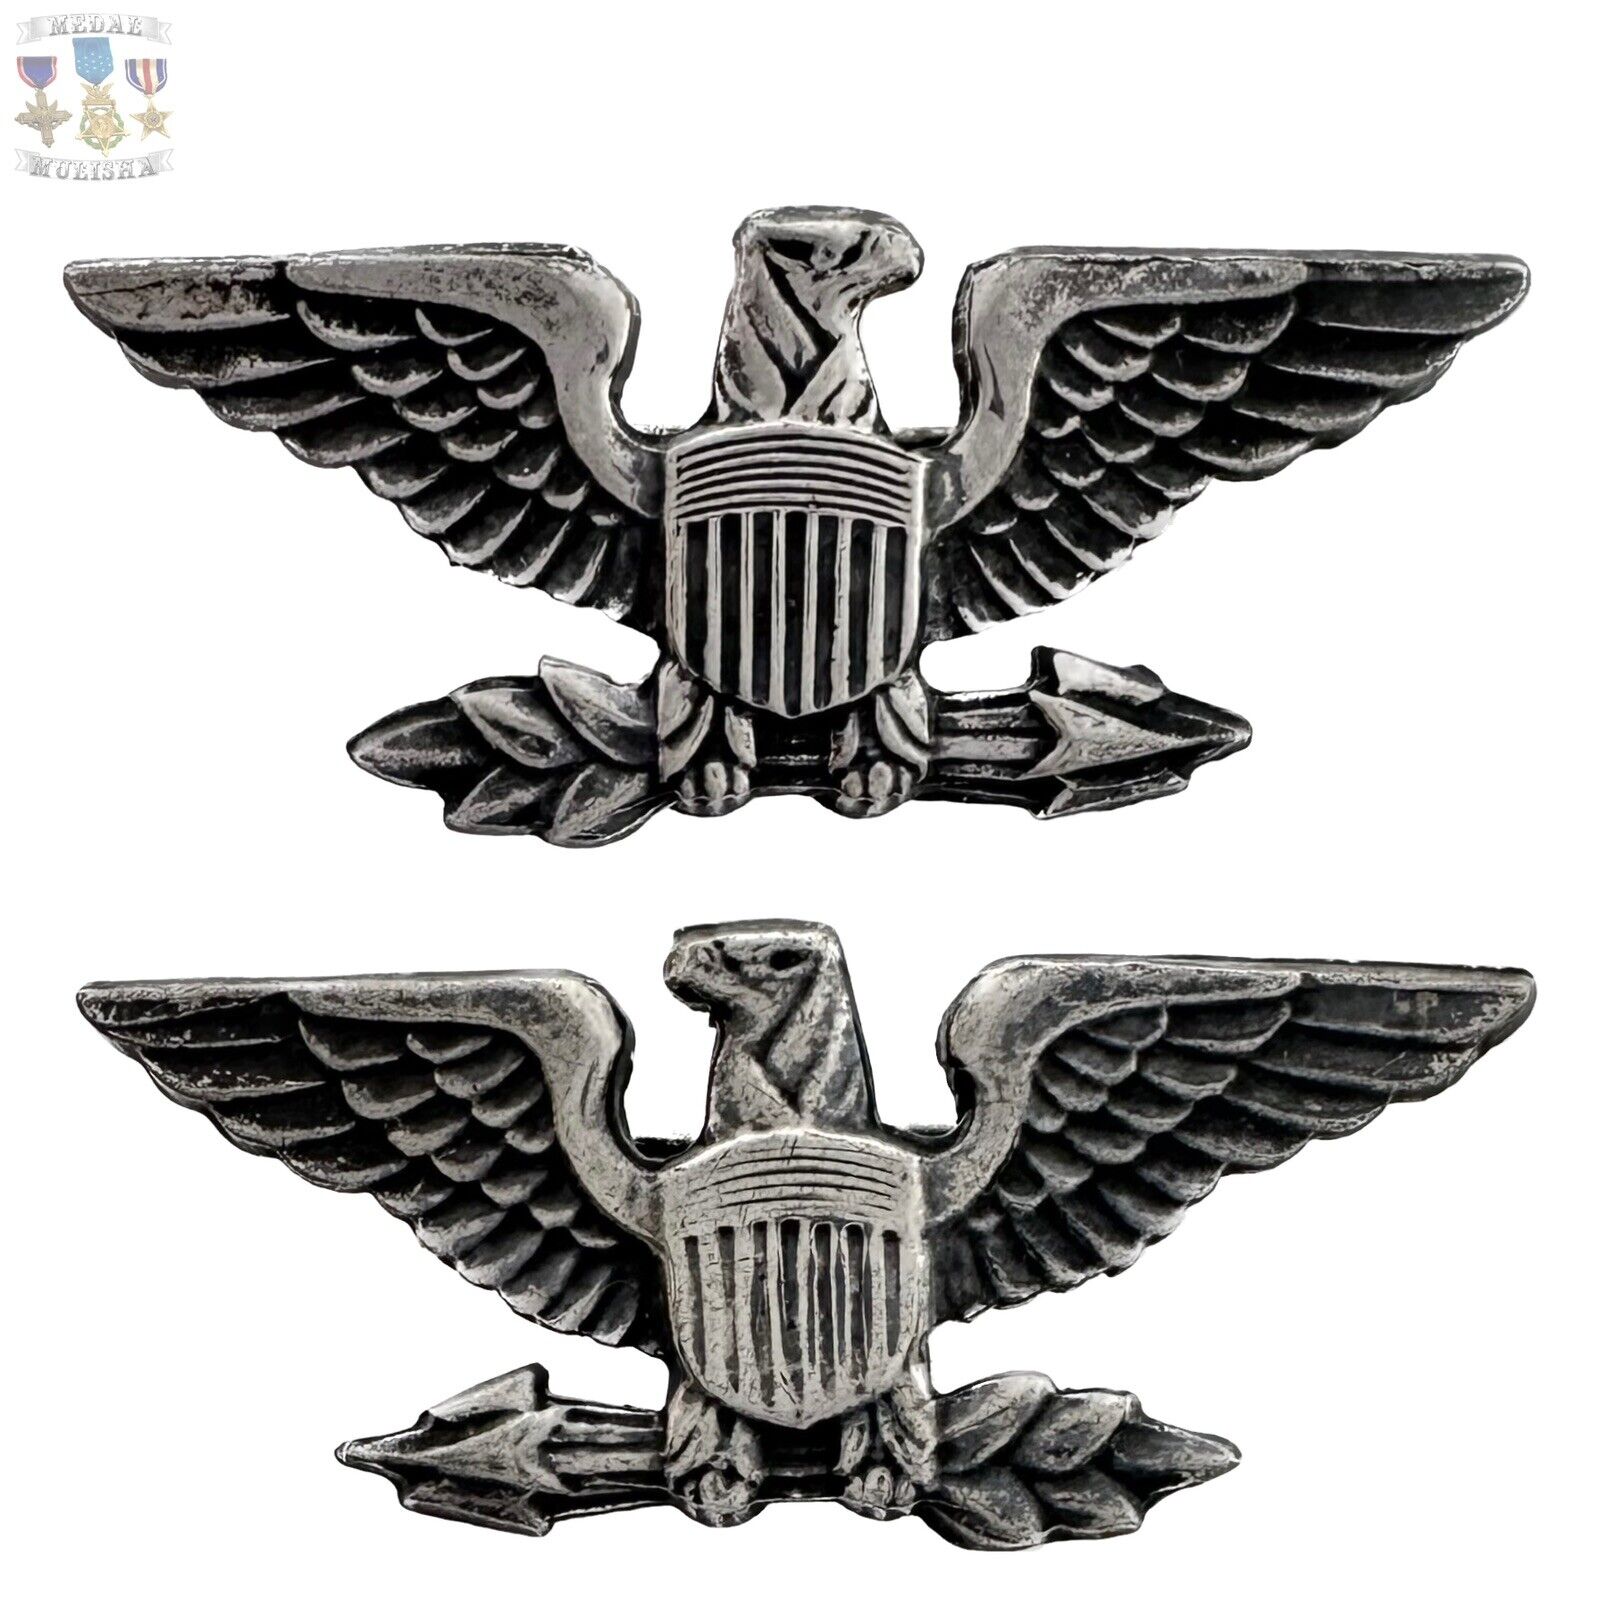 ✬LUX✬ WWII US COLONEL & CAPTAIN INSIGNIA “WAR 🦅 EAGLES” LUXENBERG STERLING WW2